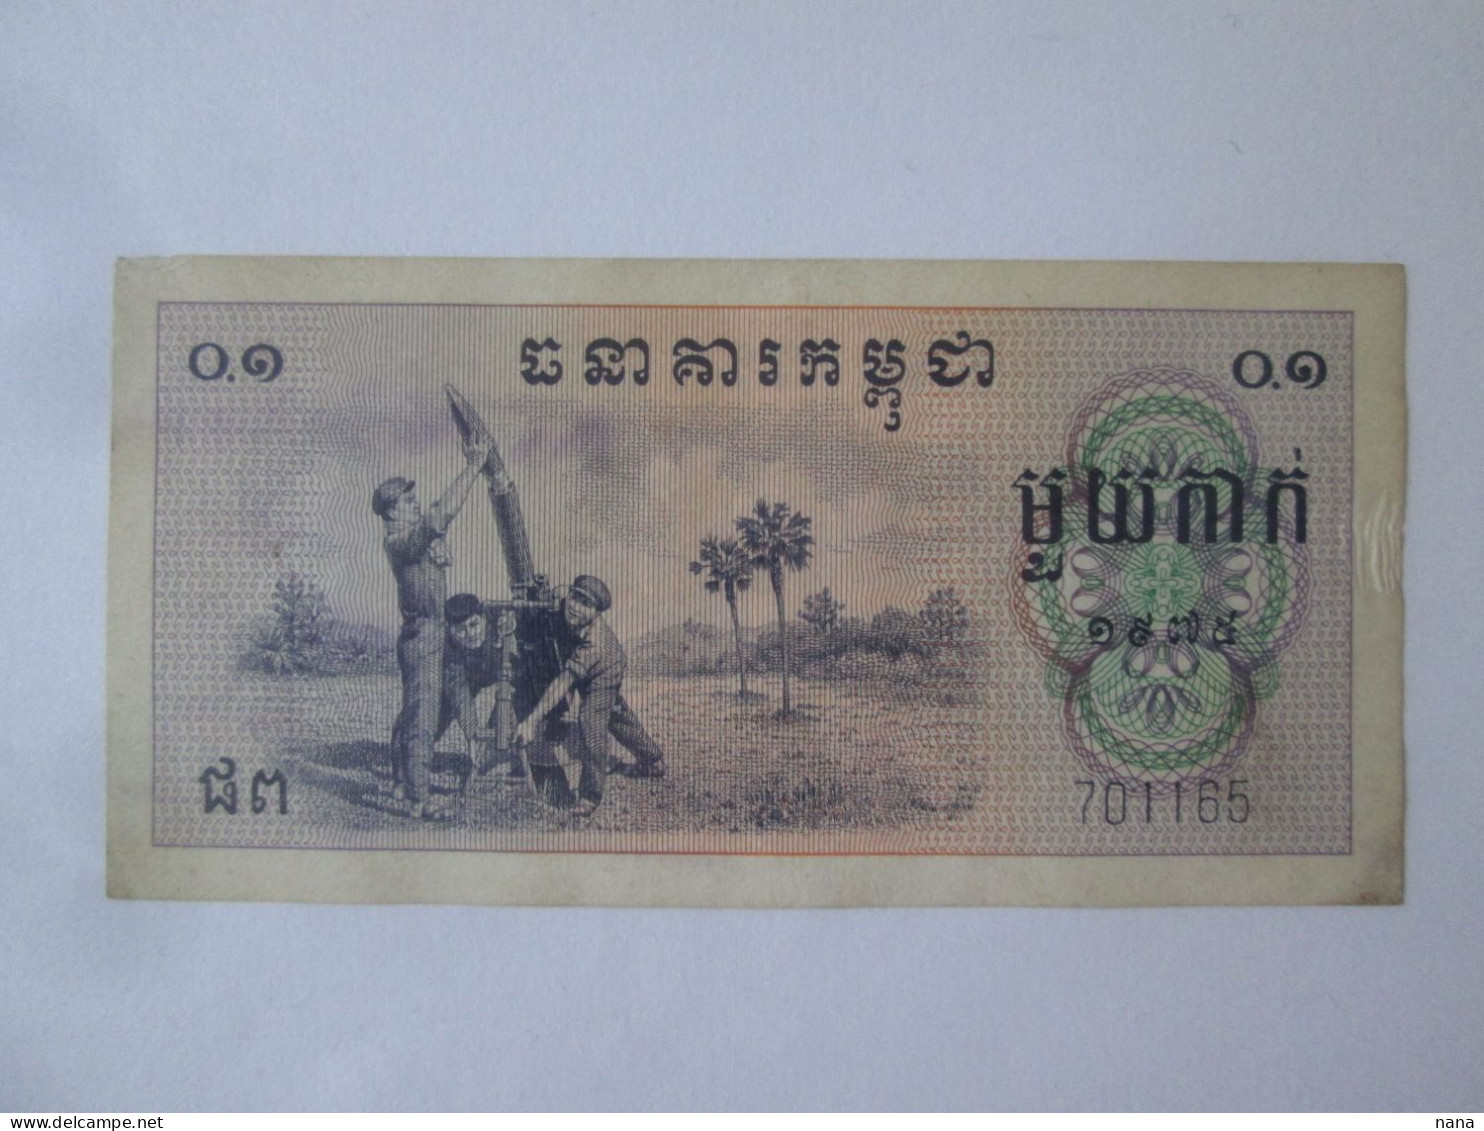 Rare! Cambodia 0.1 Riel 1975 Banknote Khmer Rouge Regime Pol Pot See Pictures - Cambodge